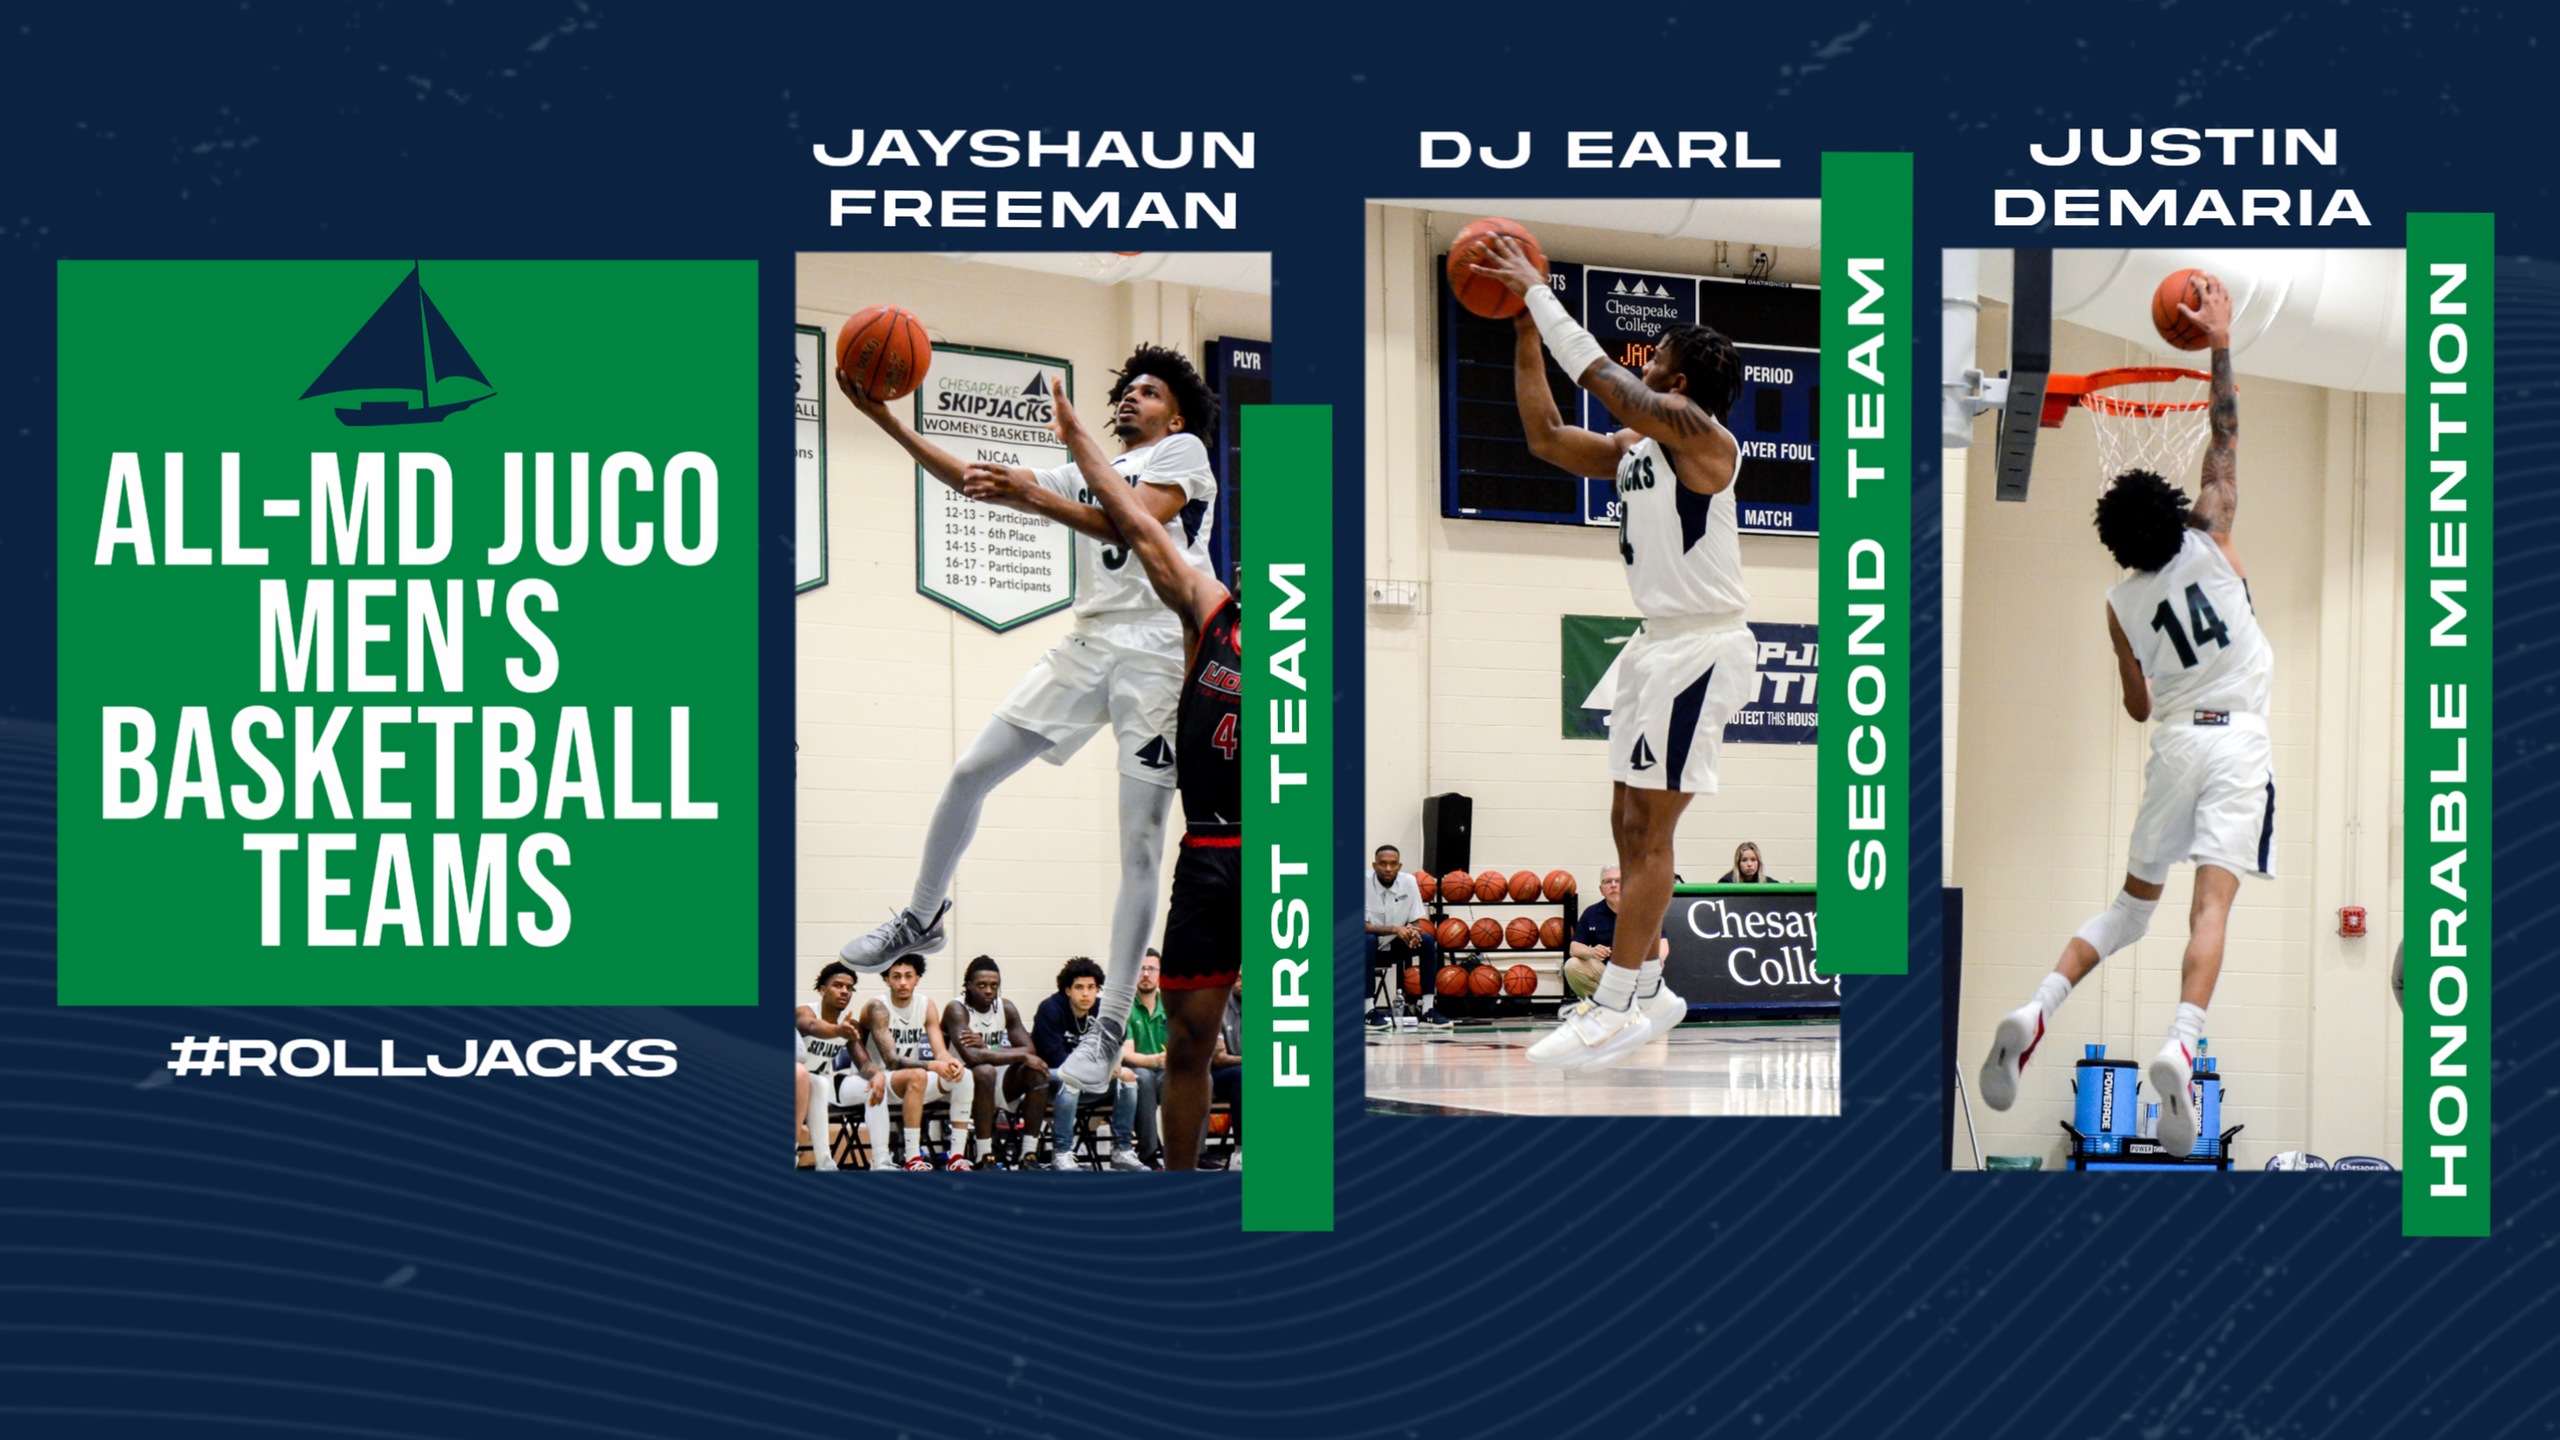 All-MD JUCO Men's Basketball